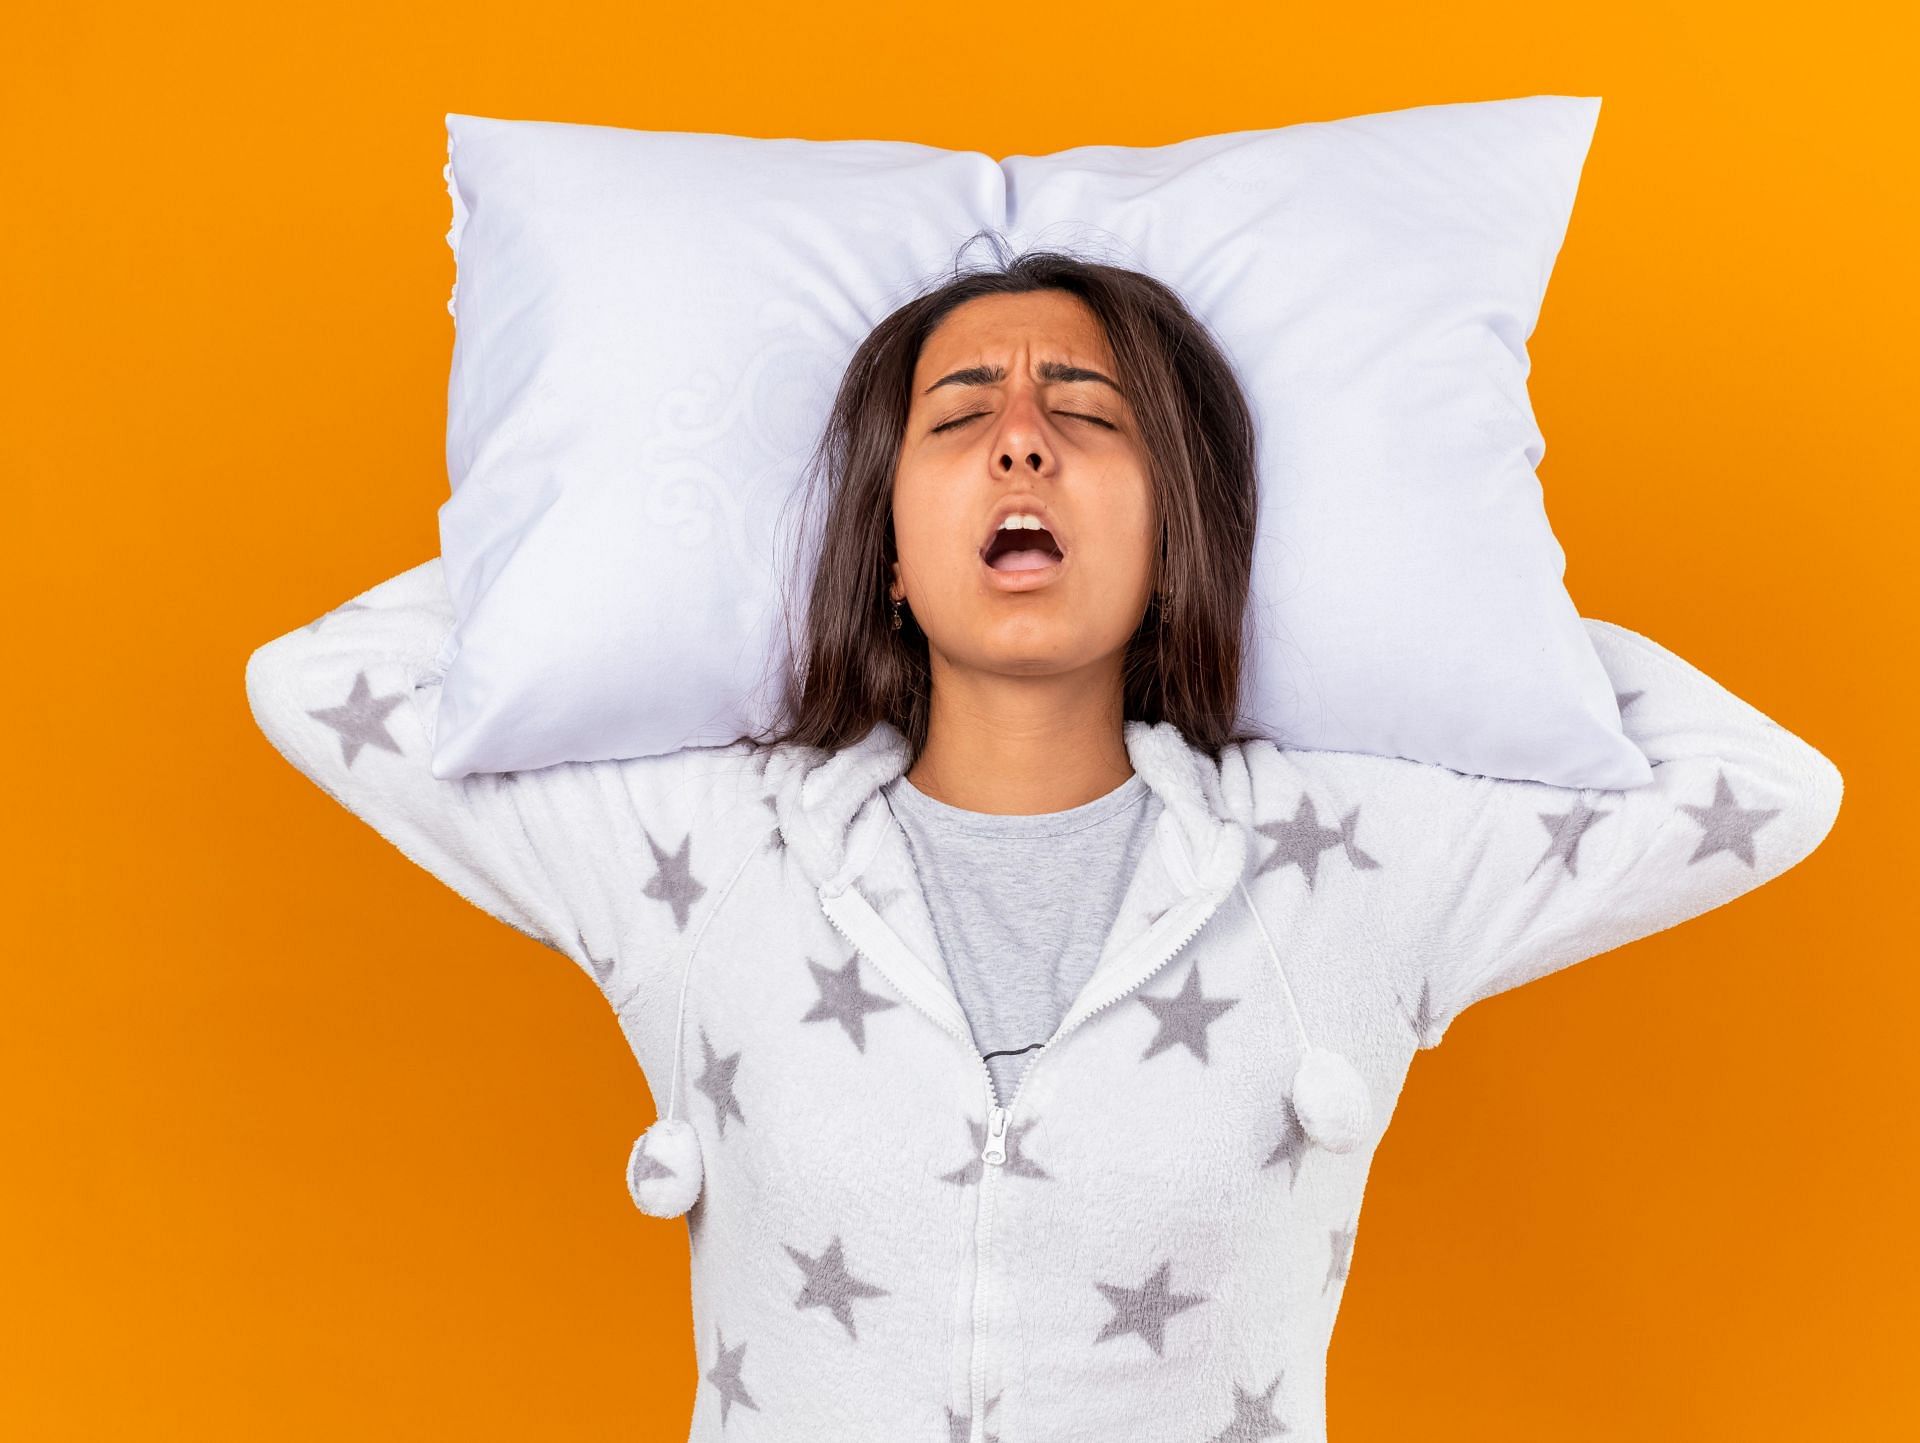 REM sleep behavior disorder is a rare condition that can also become dangerous for the person. (Image via Freepik/ Freepik)